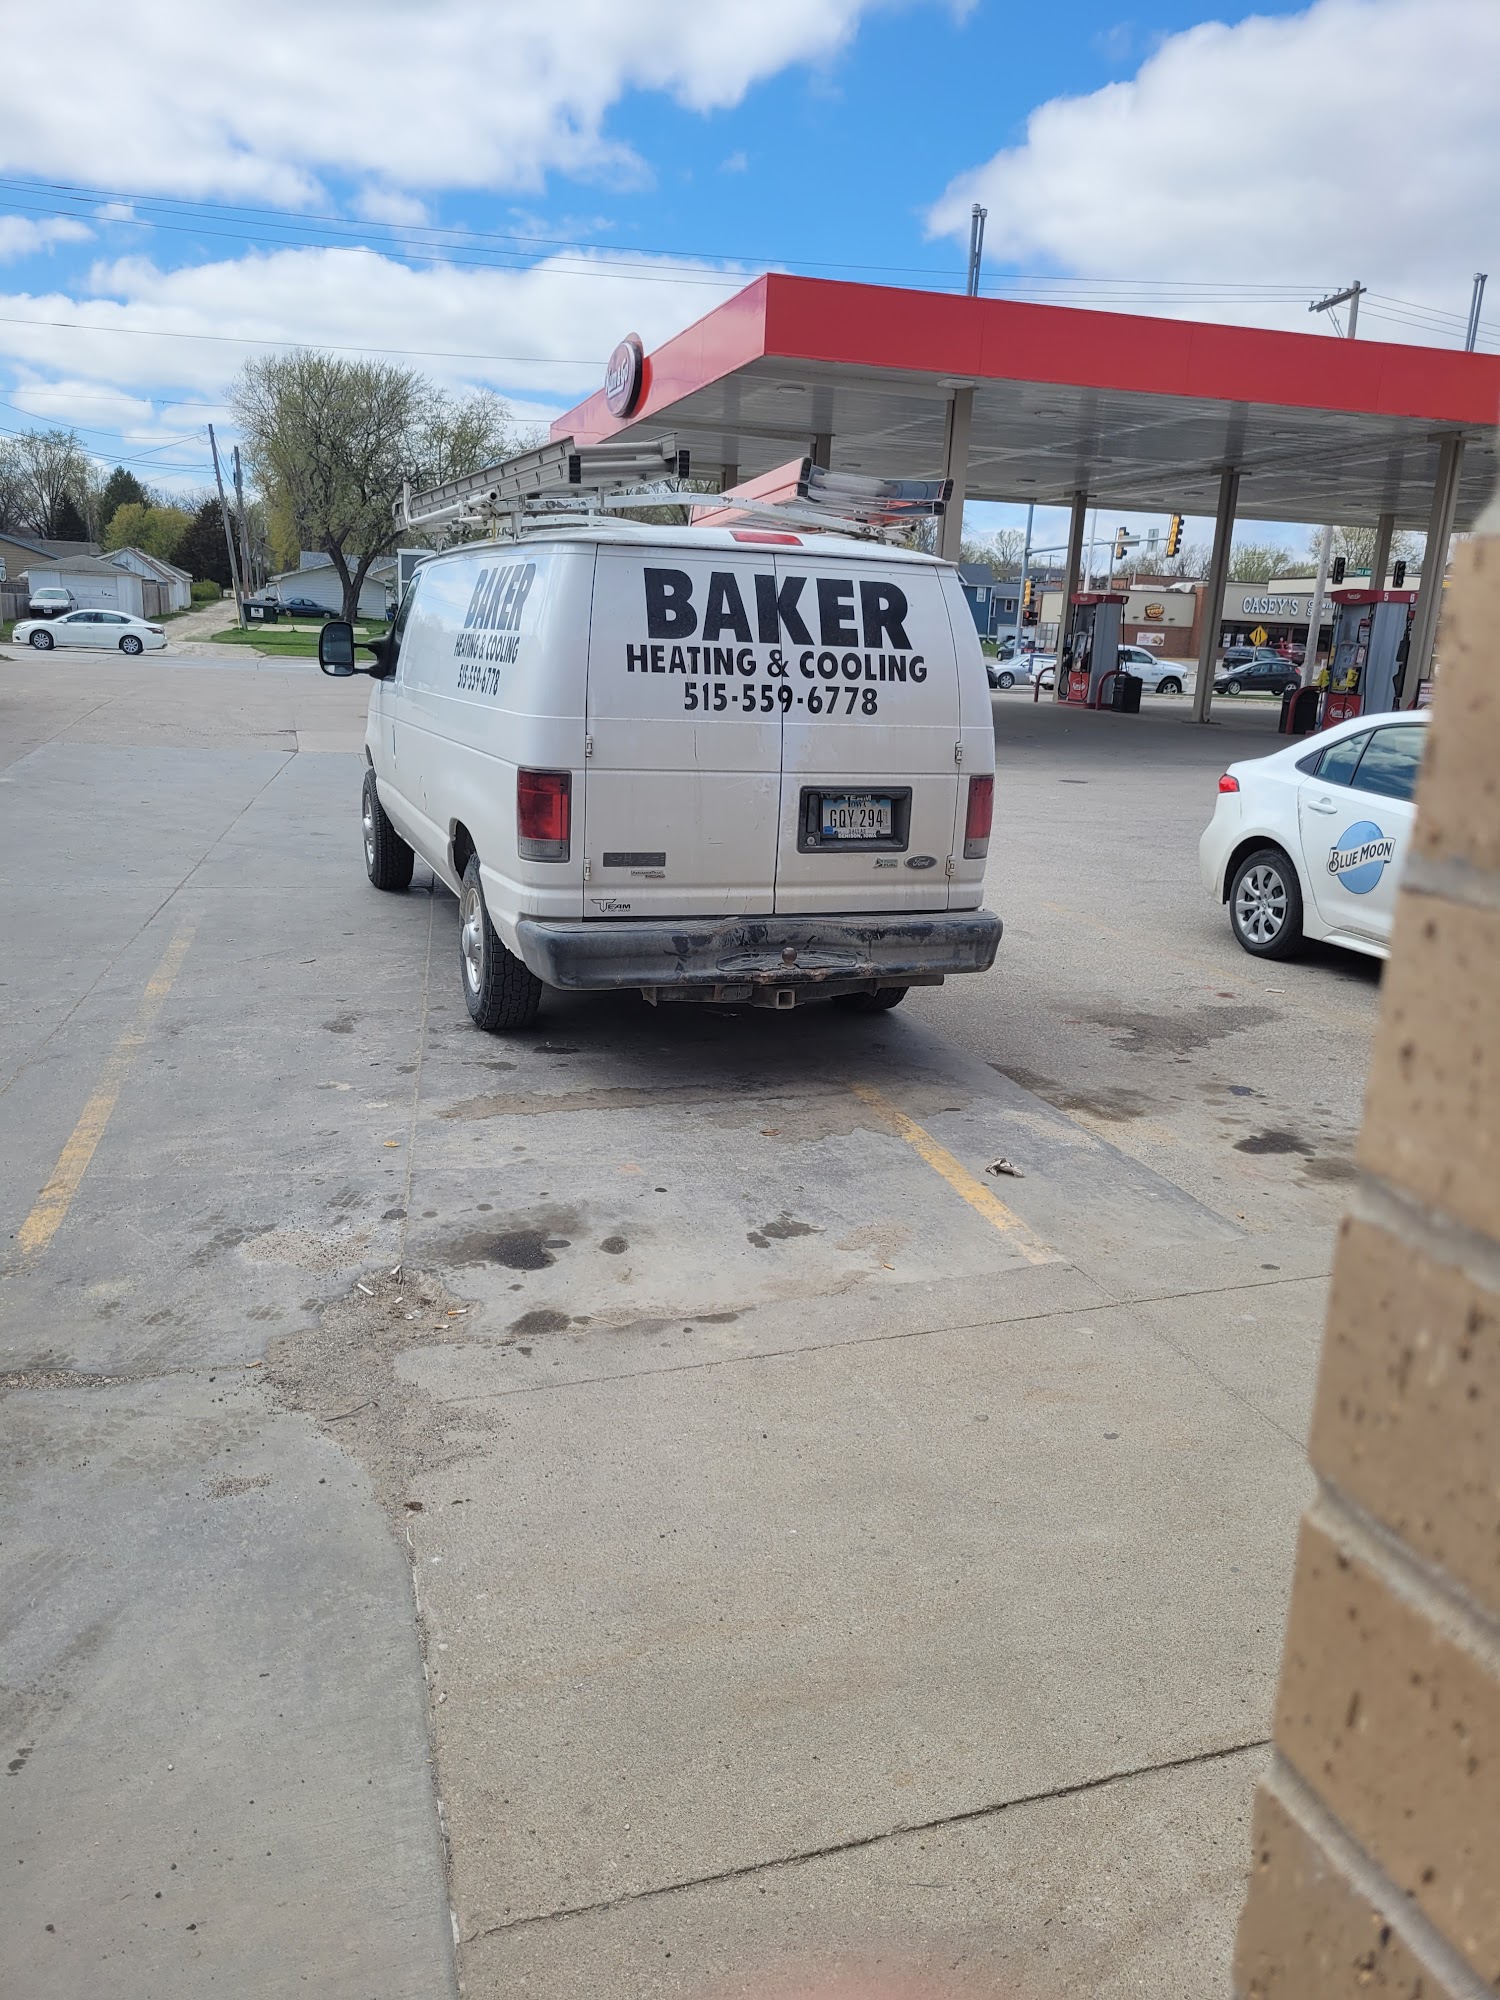 Baker Heating & Cooling 28653 G Ave, Redfield Iowa 50233